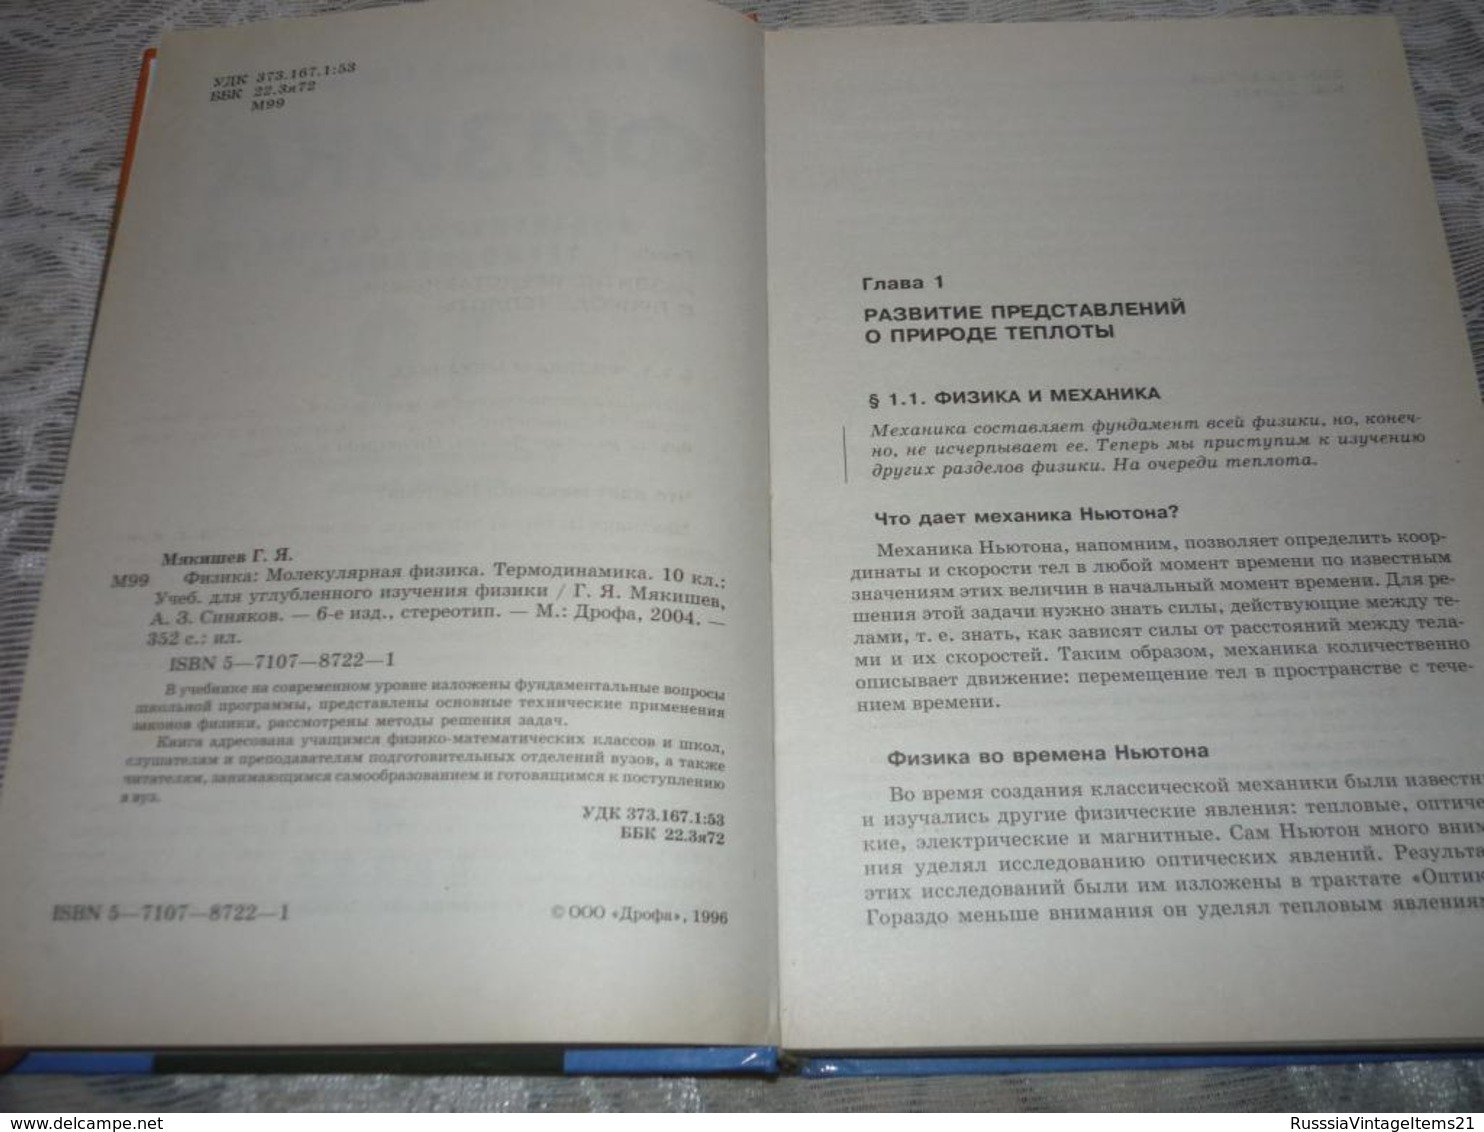 Russian Textbook - In Russian - Textbook From Russia - Myakishev G. Sinyakov A. Physics: Molecular Physics. Thermodynami - Langues Slaves